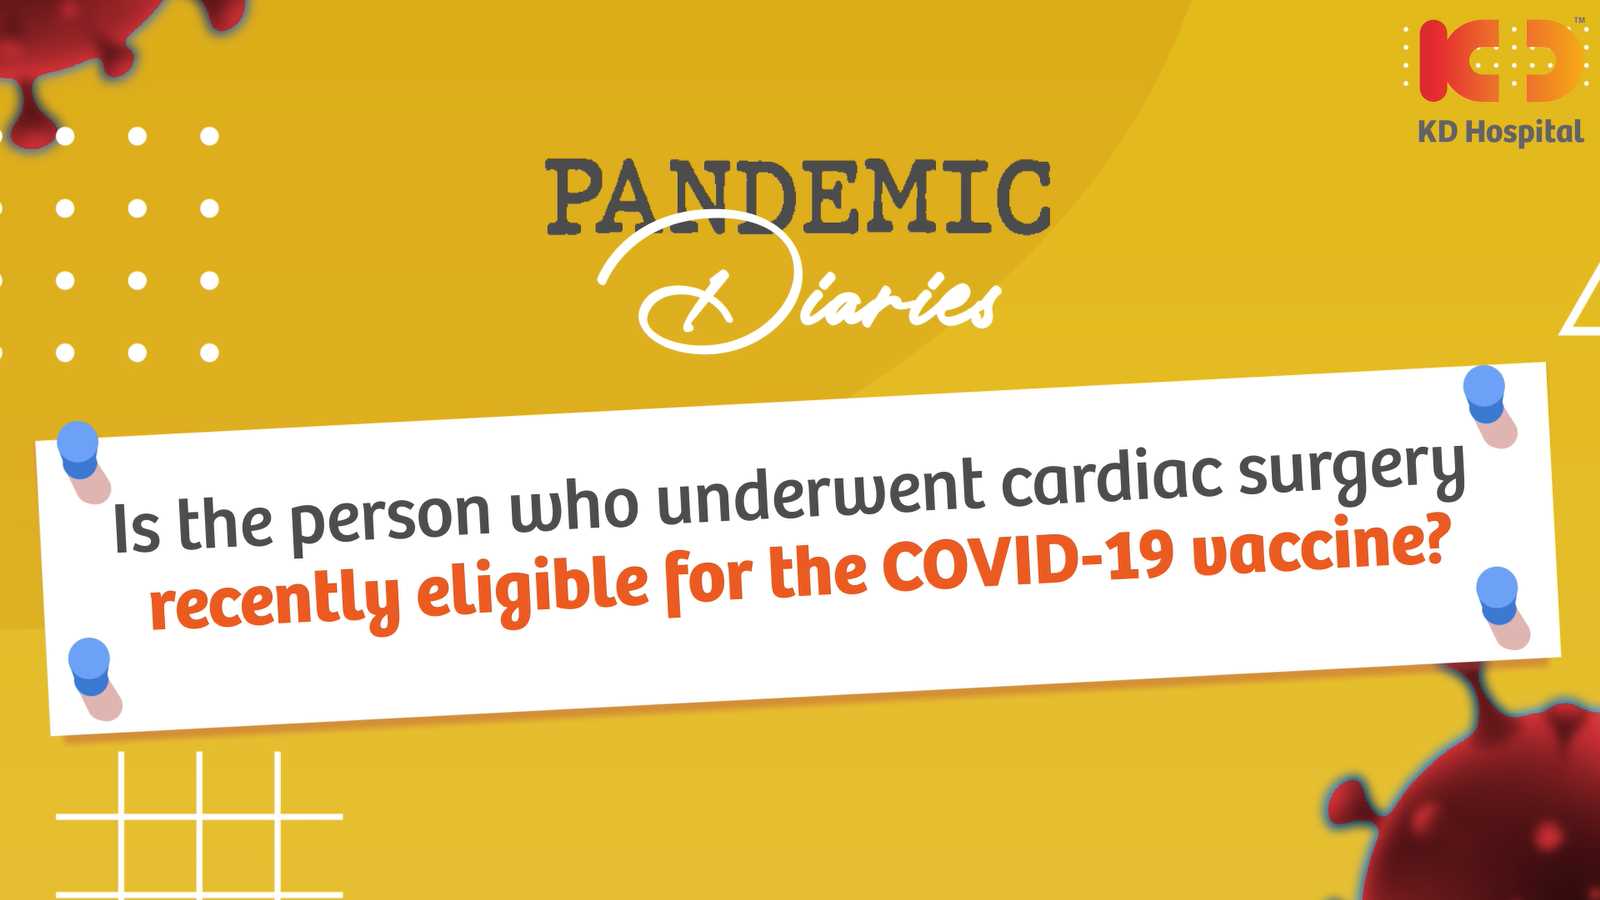 Keep your heart and health safe during the pandemic. Hear our consultant cardiologist Dr. Abhishek talk about cardiac diseases and COVID-19. 
Watch the full episode of 